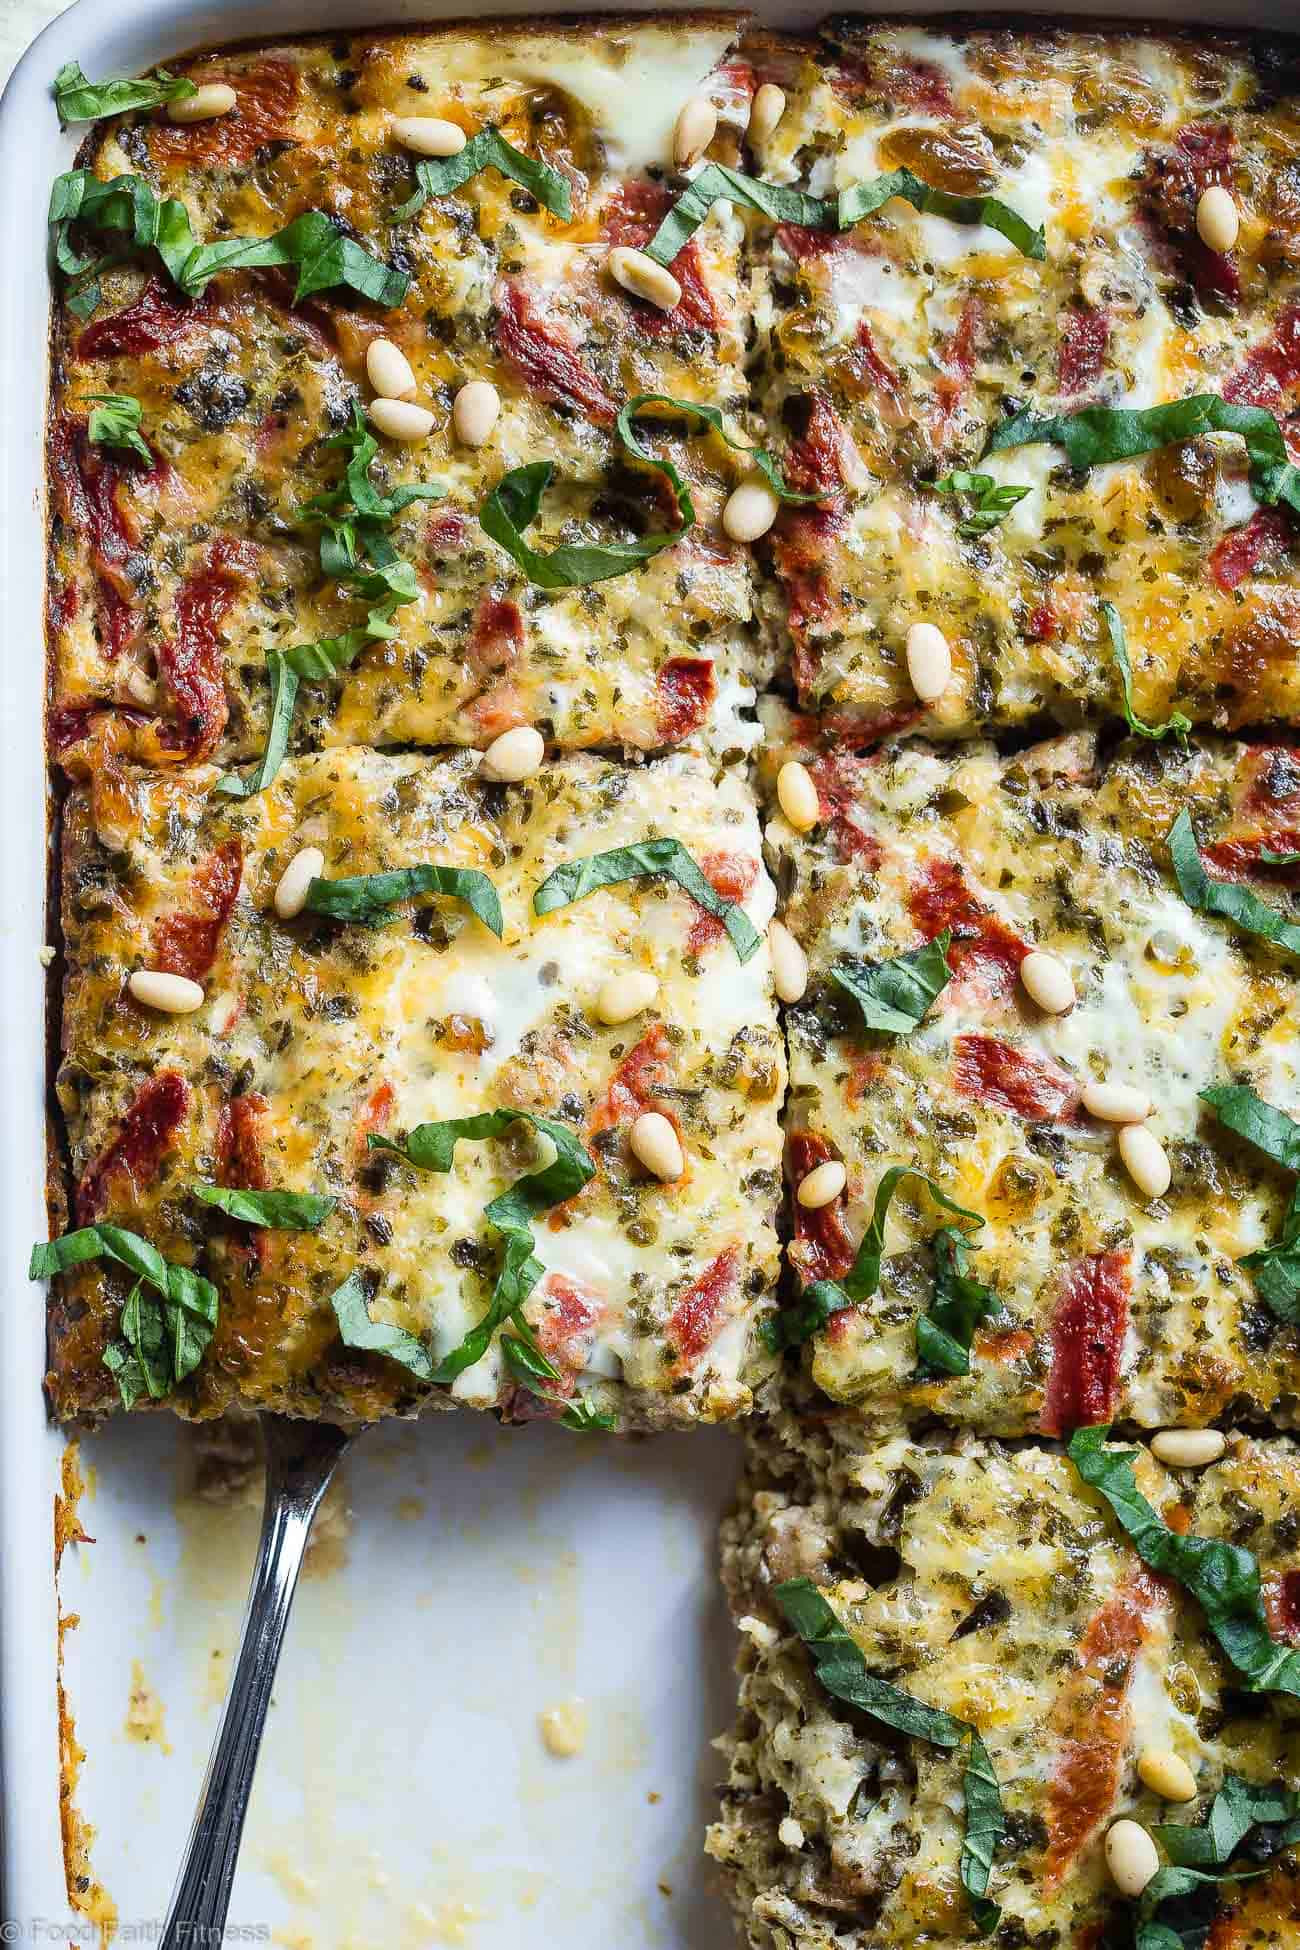 Keto Breakfast Sausage
 Easy Low Carb Keto Breakfast Casserole with Sausage